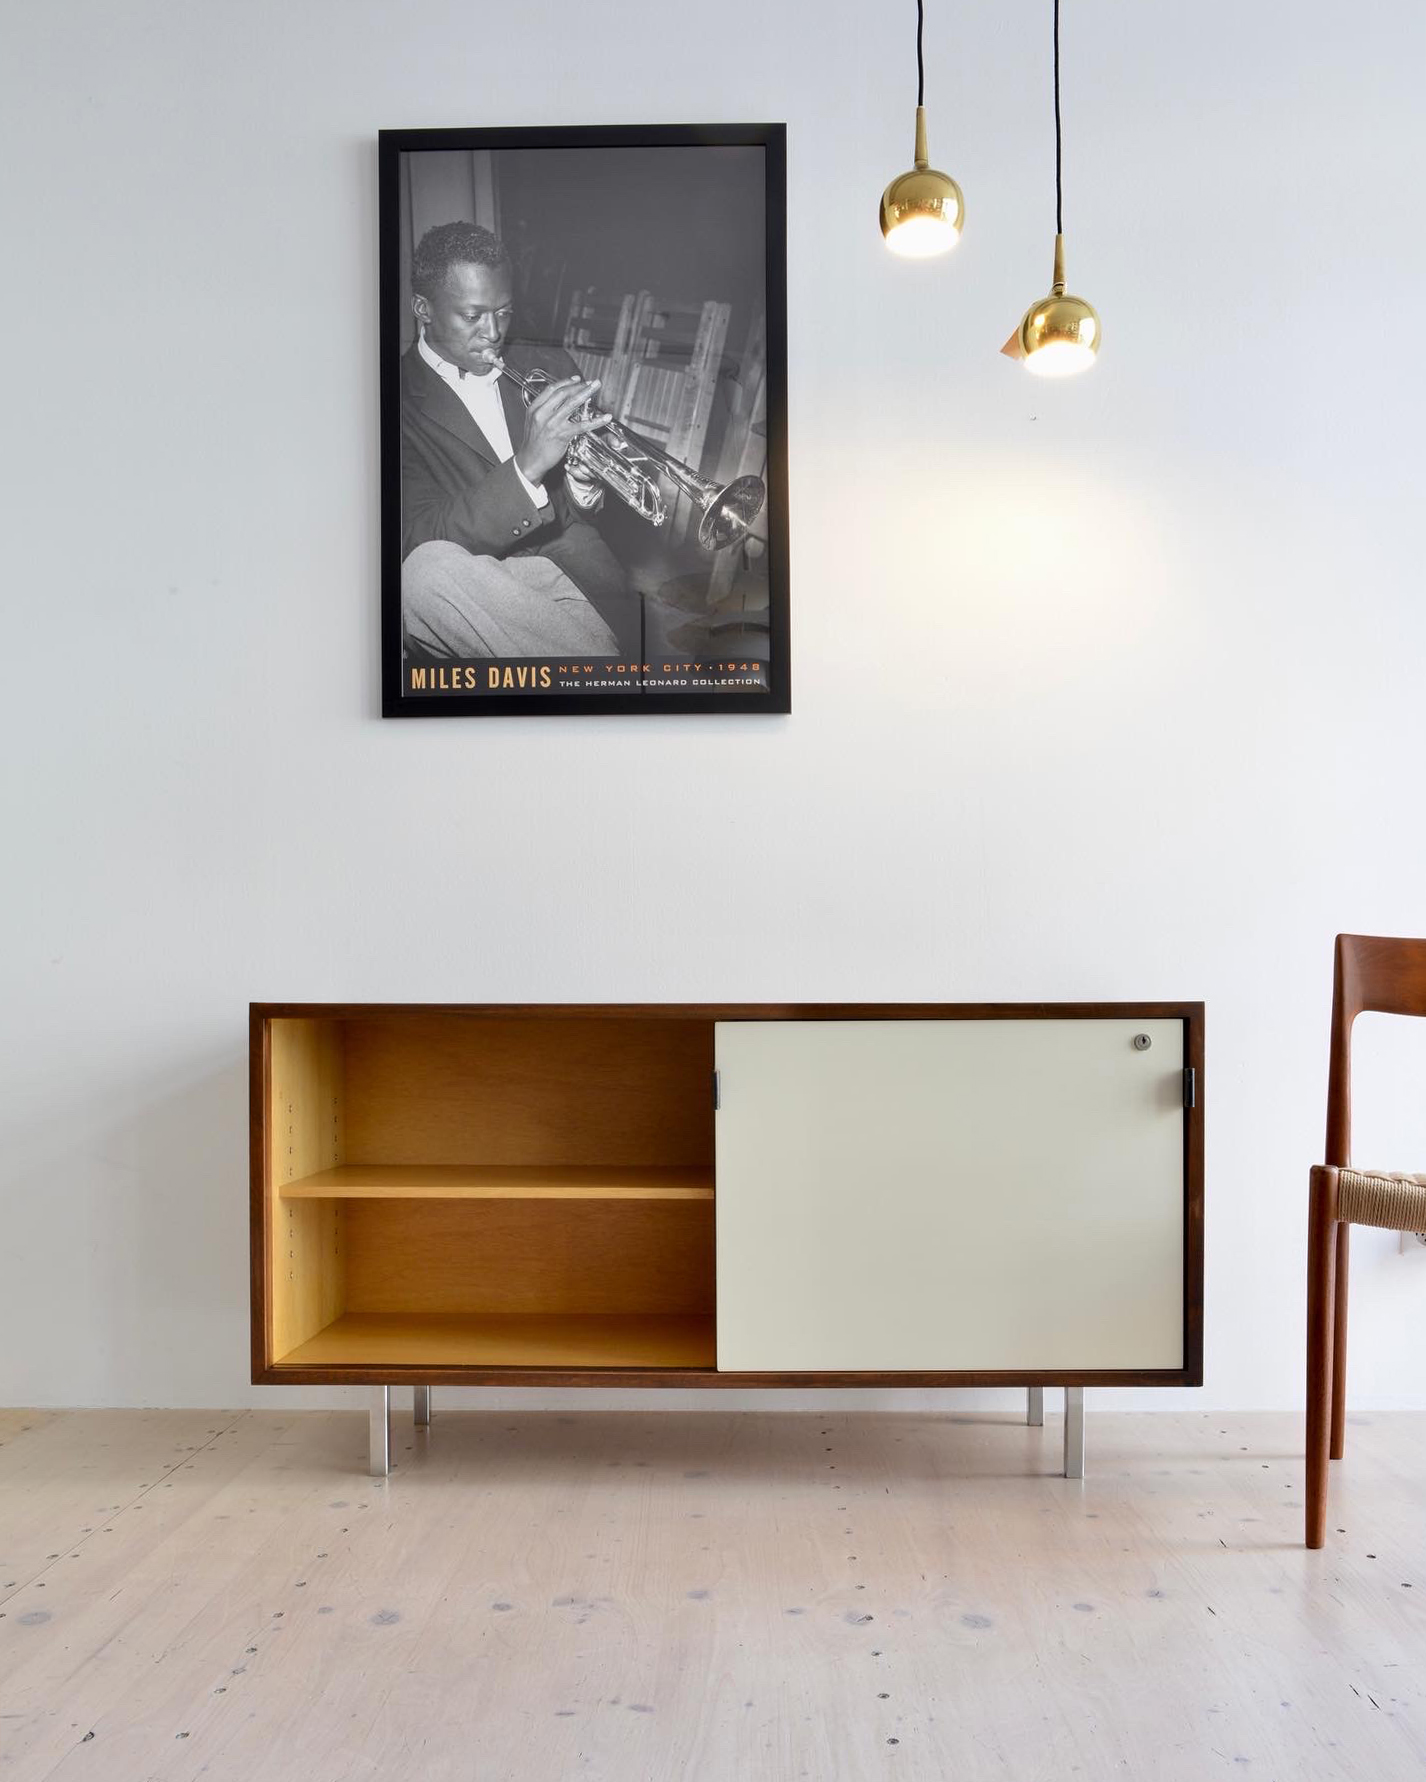 Florence Knoll Sideboard in Beige by Florence Knoll, Knoll International for Wohnbedarf - Switzerland, 1960s. Available at heyday möbel, Grubenstrasse 19, 8045 Zürich.